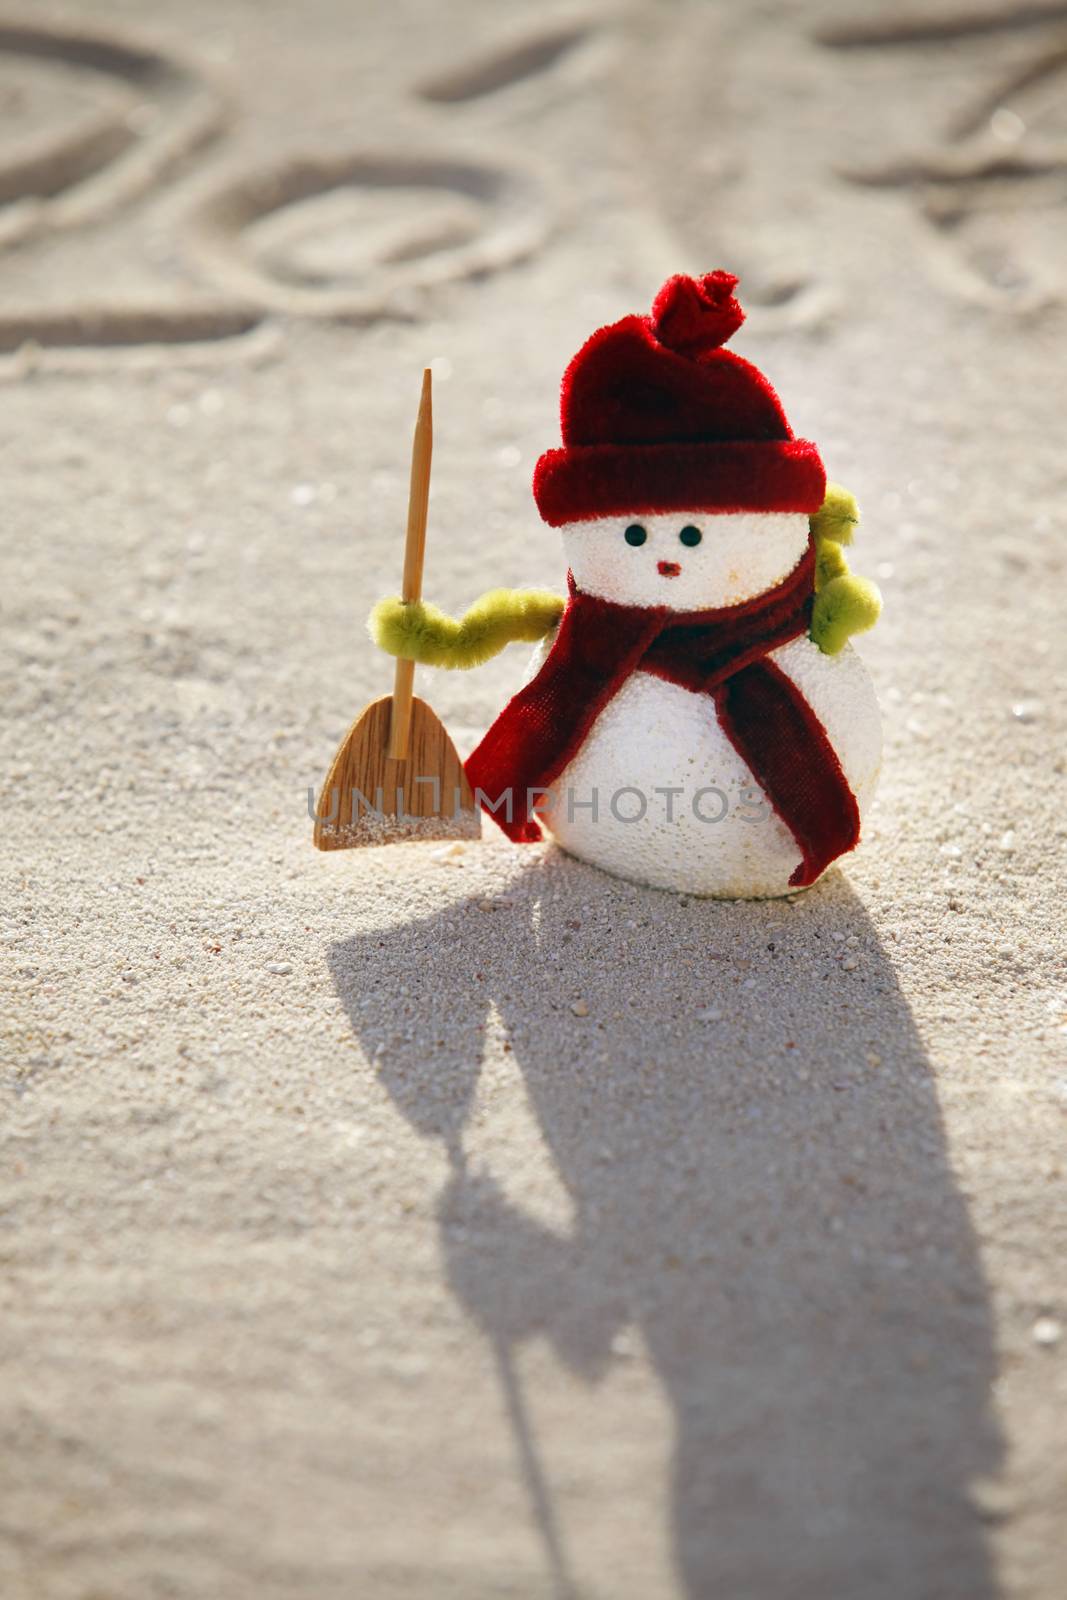 Toy snowman on the sand and figures 2017